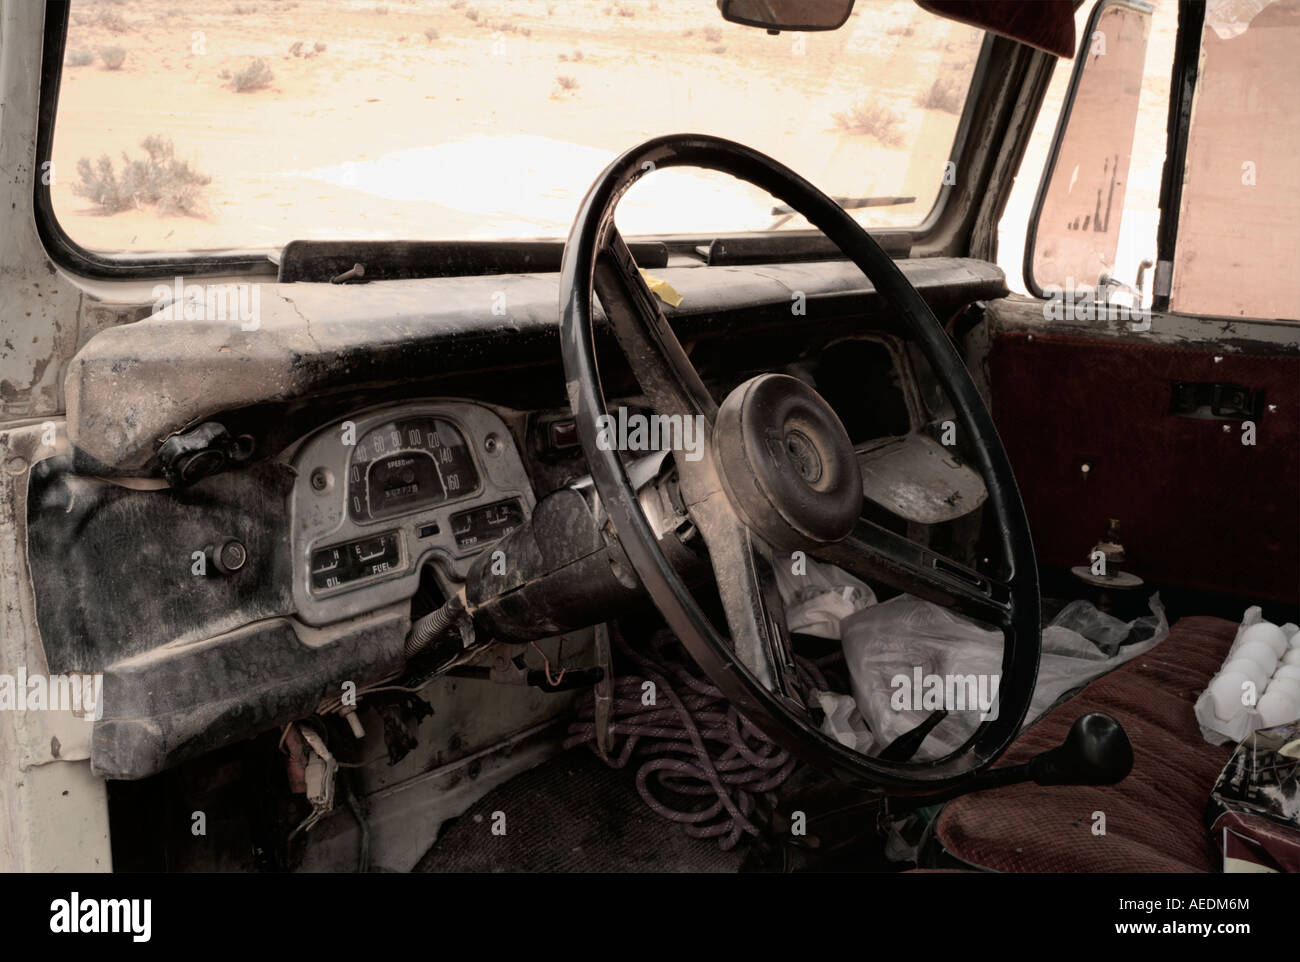 Interior Of An Old Truck Stock Photo 13651531 Alamy